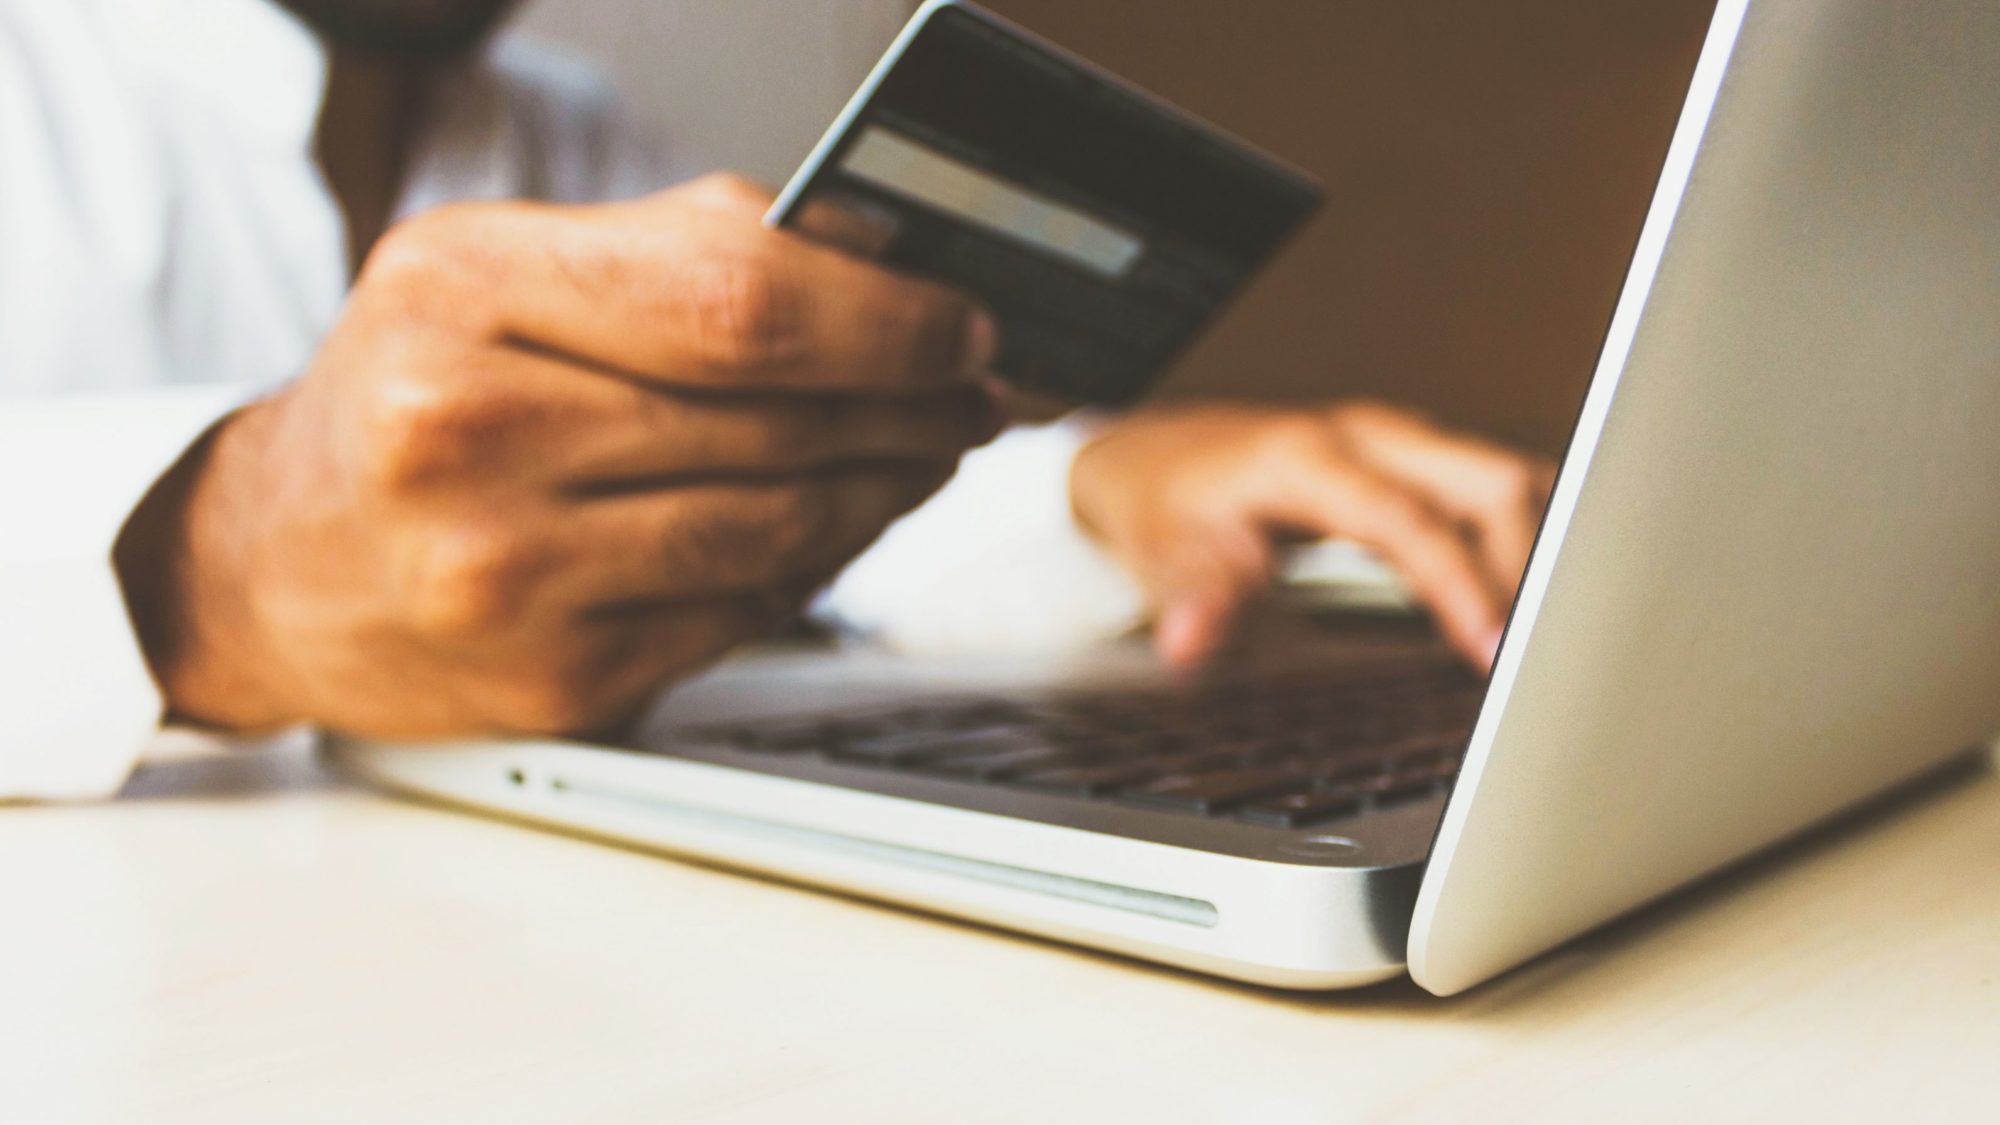 eCommerce fraud is fast becoming a crisis for merchants across the globe